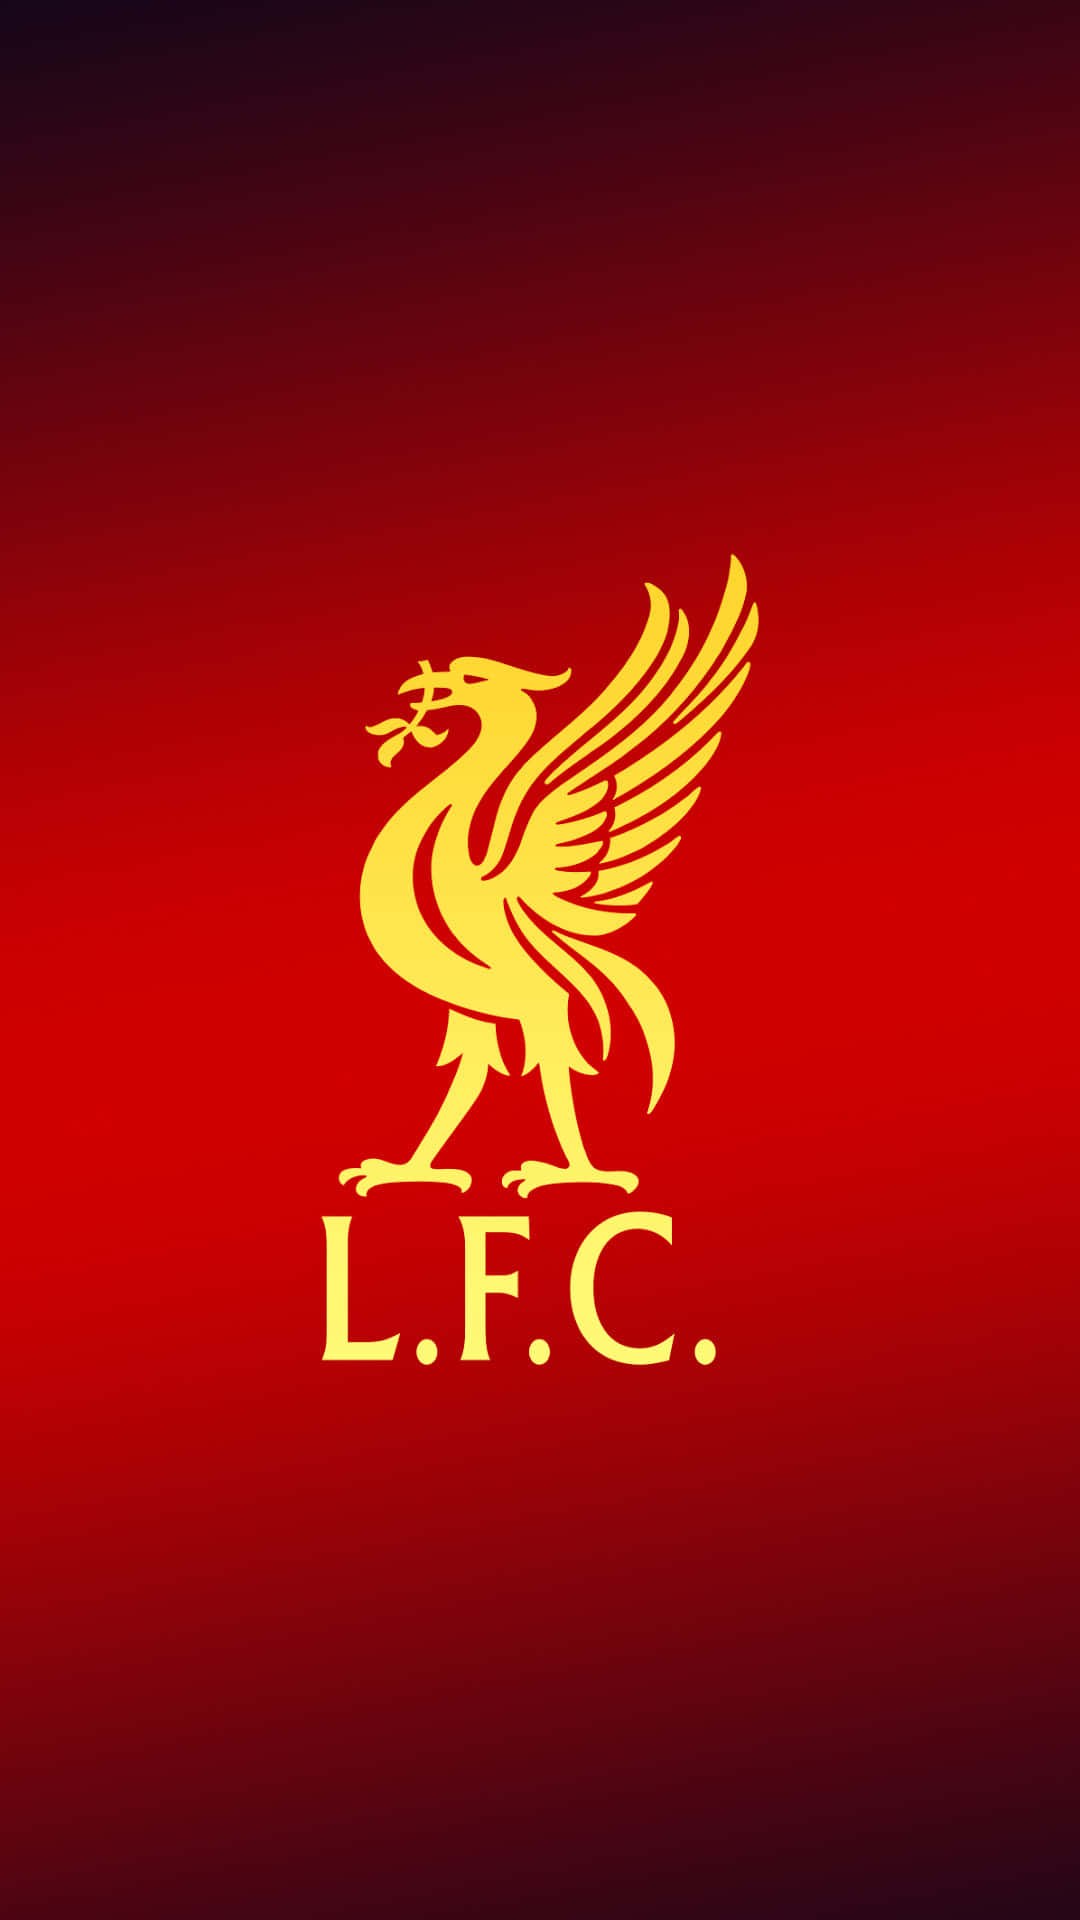 Celebrate the success of EPL club Liverpool FC with this unique Liverpool FC-themed iPhone 11. Wallpaper